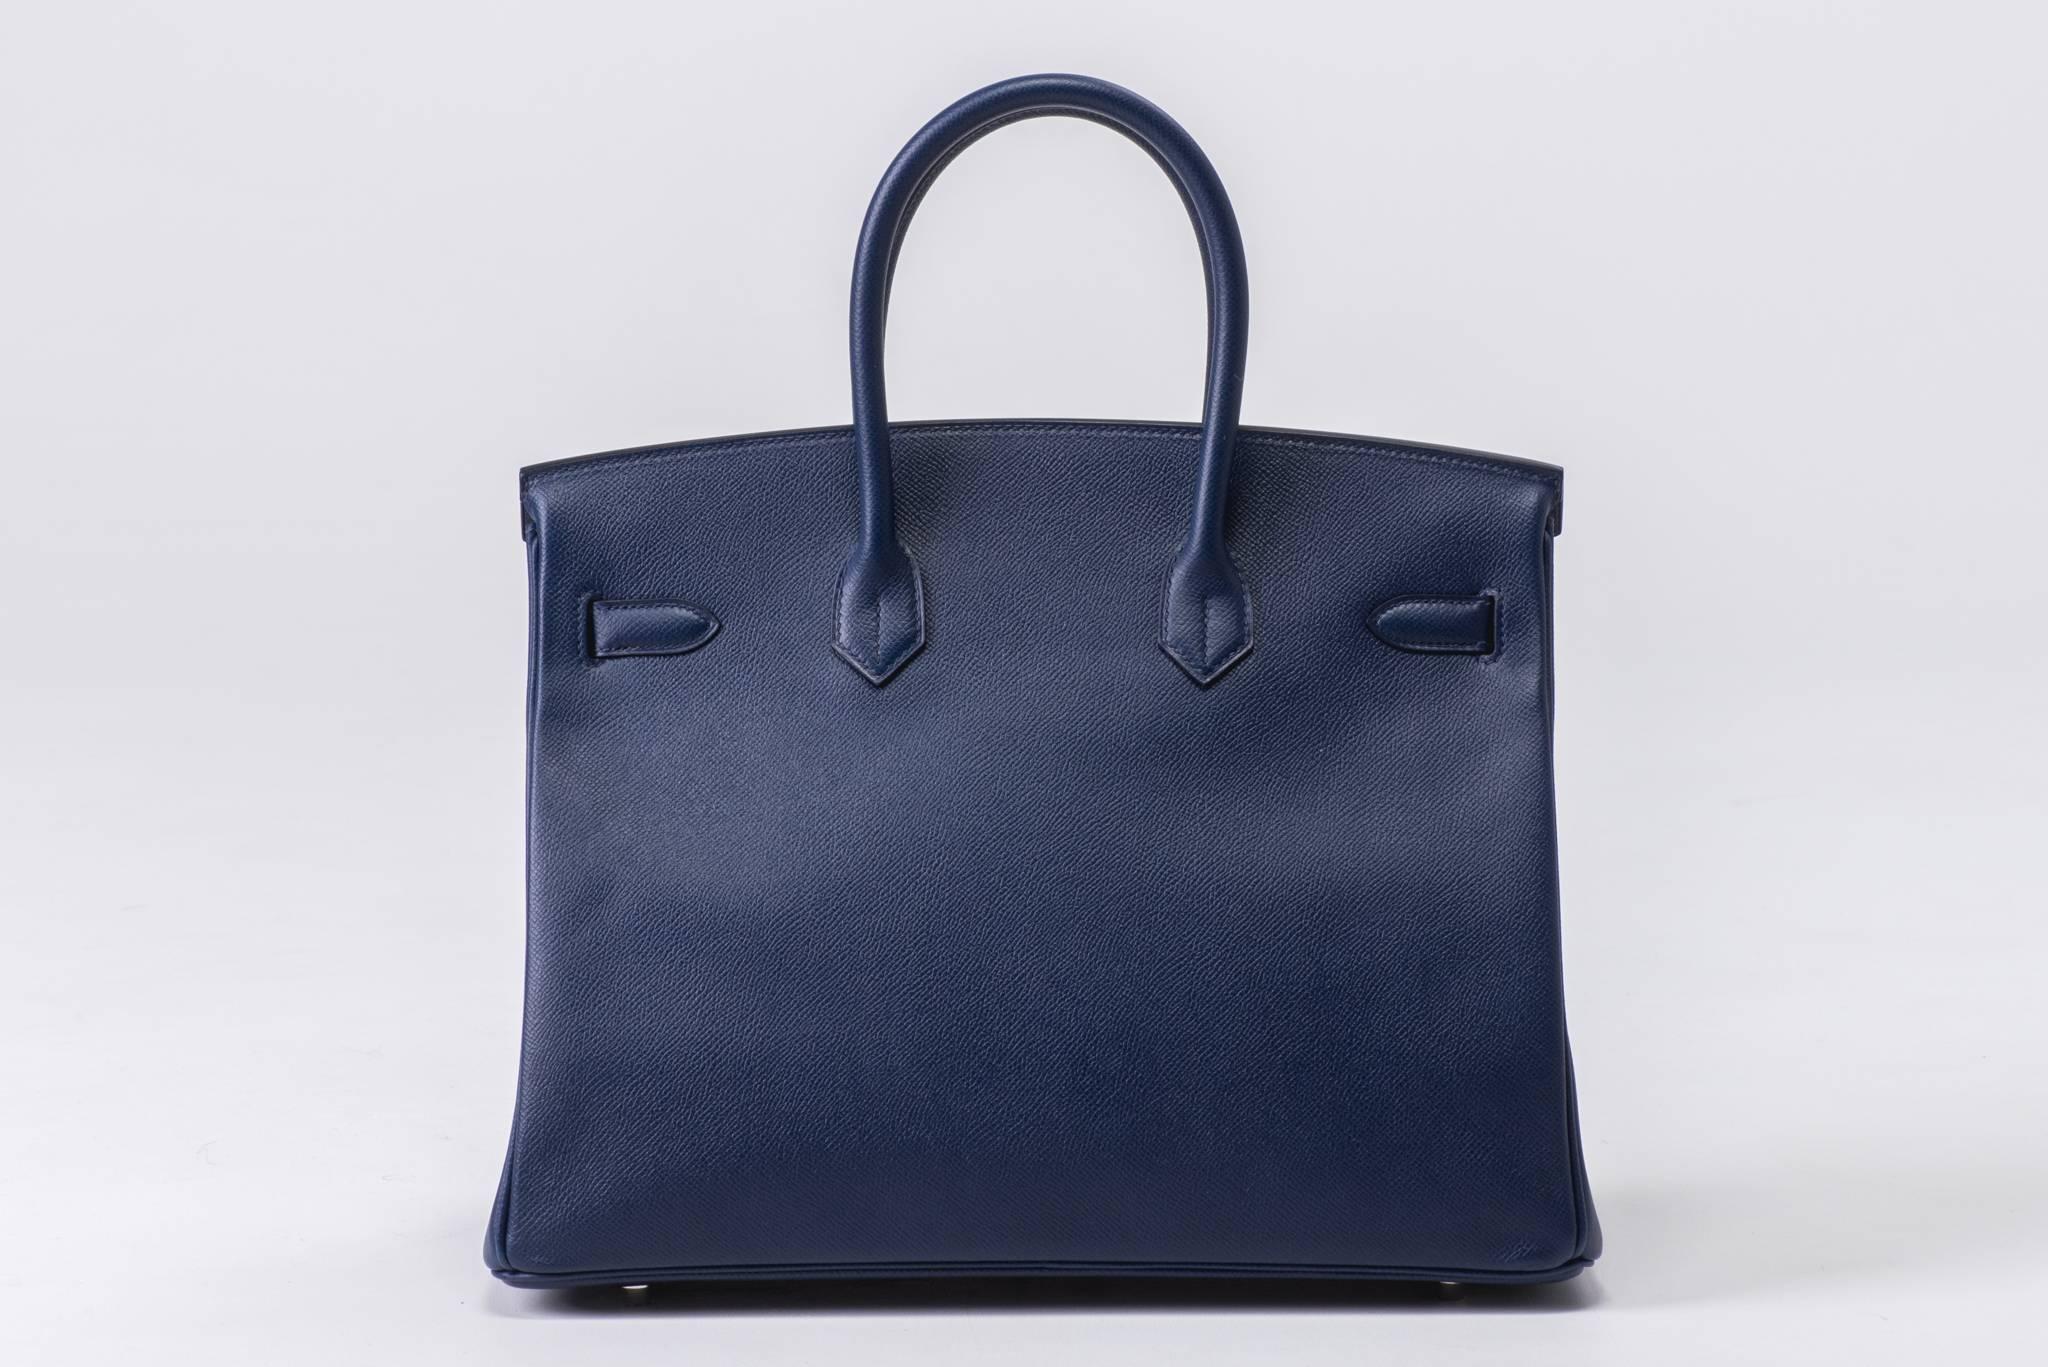 Hermes Birkin 35 blue sapphire epsom leather with palladium hardware. Partial plastic on metal parts, bag has been carried a handful of times only. Excellent condition except front dent shown in main photo. Handle drop 4.5